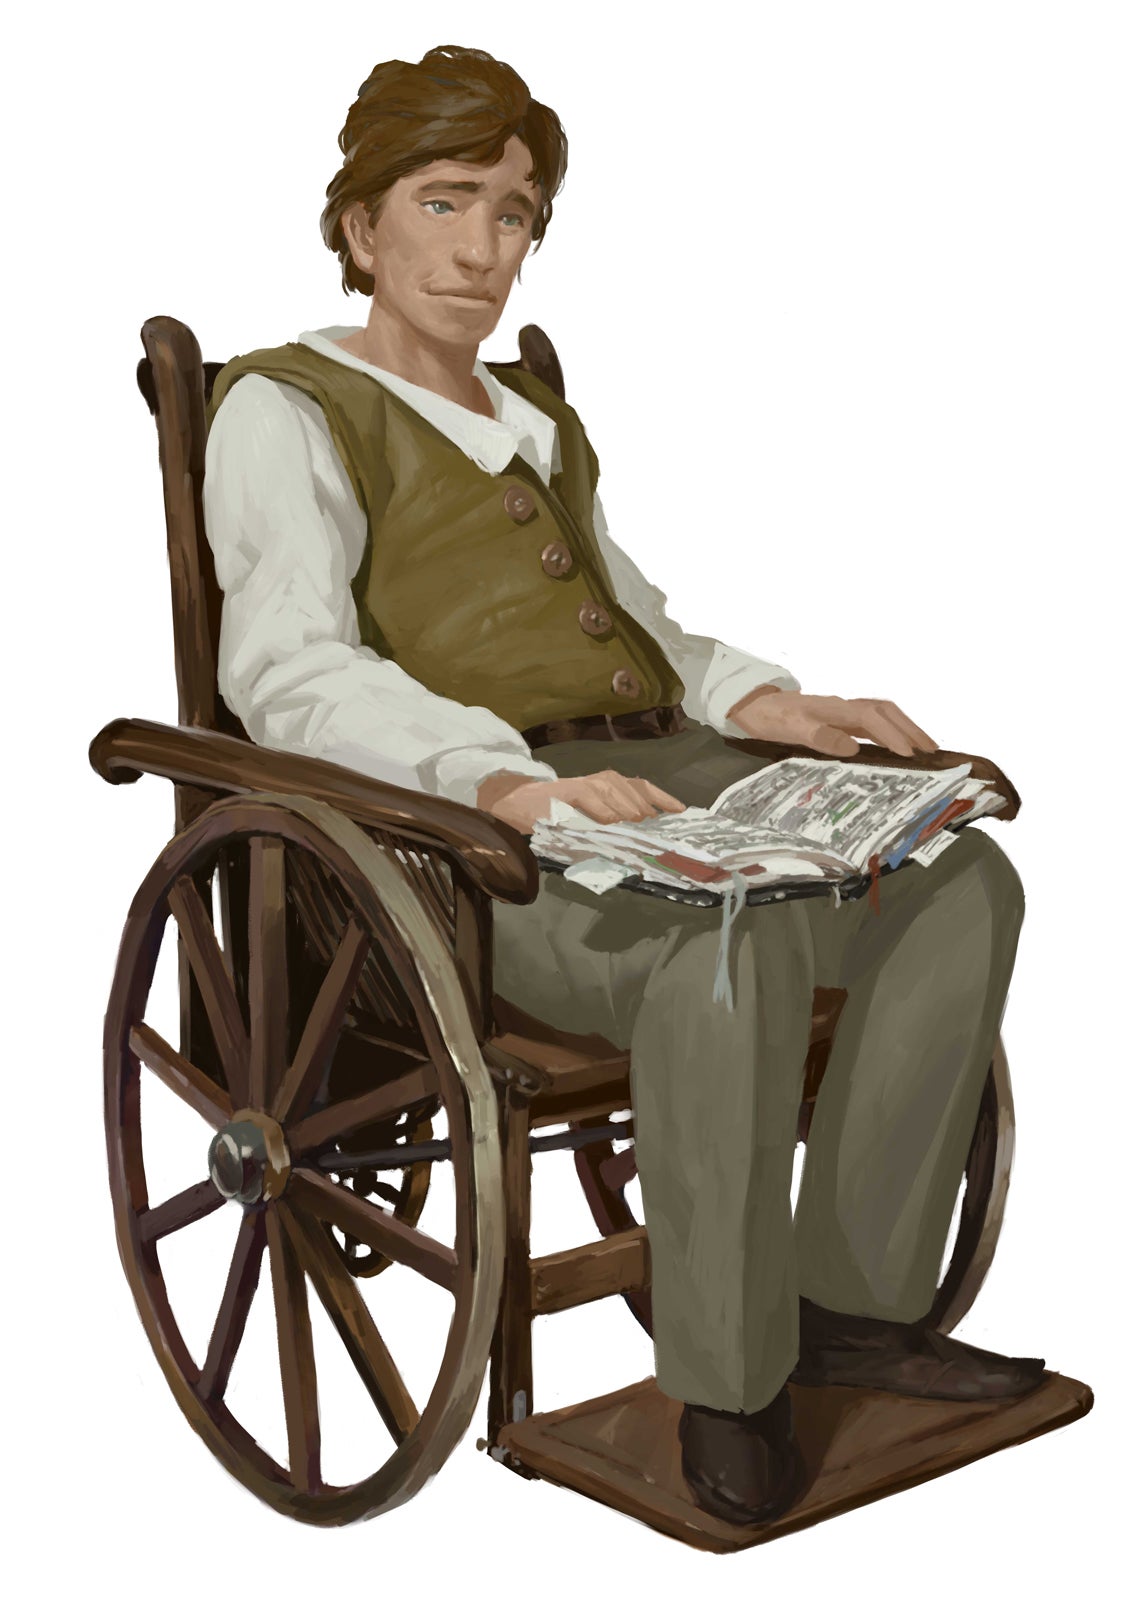 A human man sits in a wooden wheelchair with an open book on his lap. The book has several ribbons, bookmarks, and notes poking out of the edges.